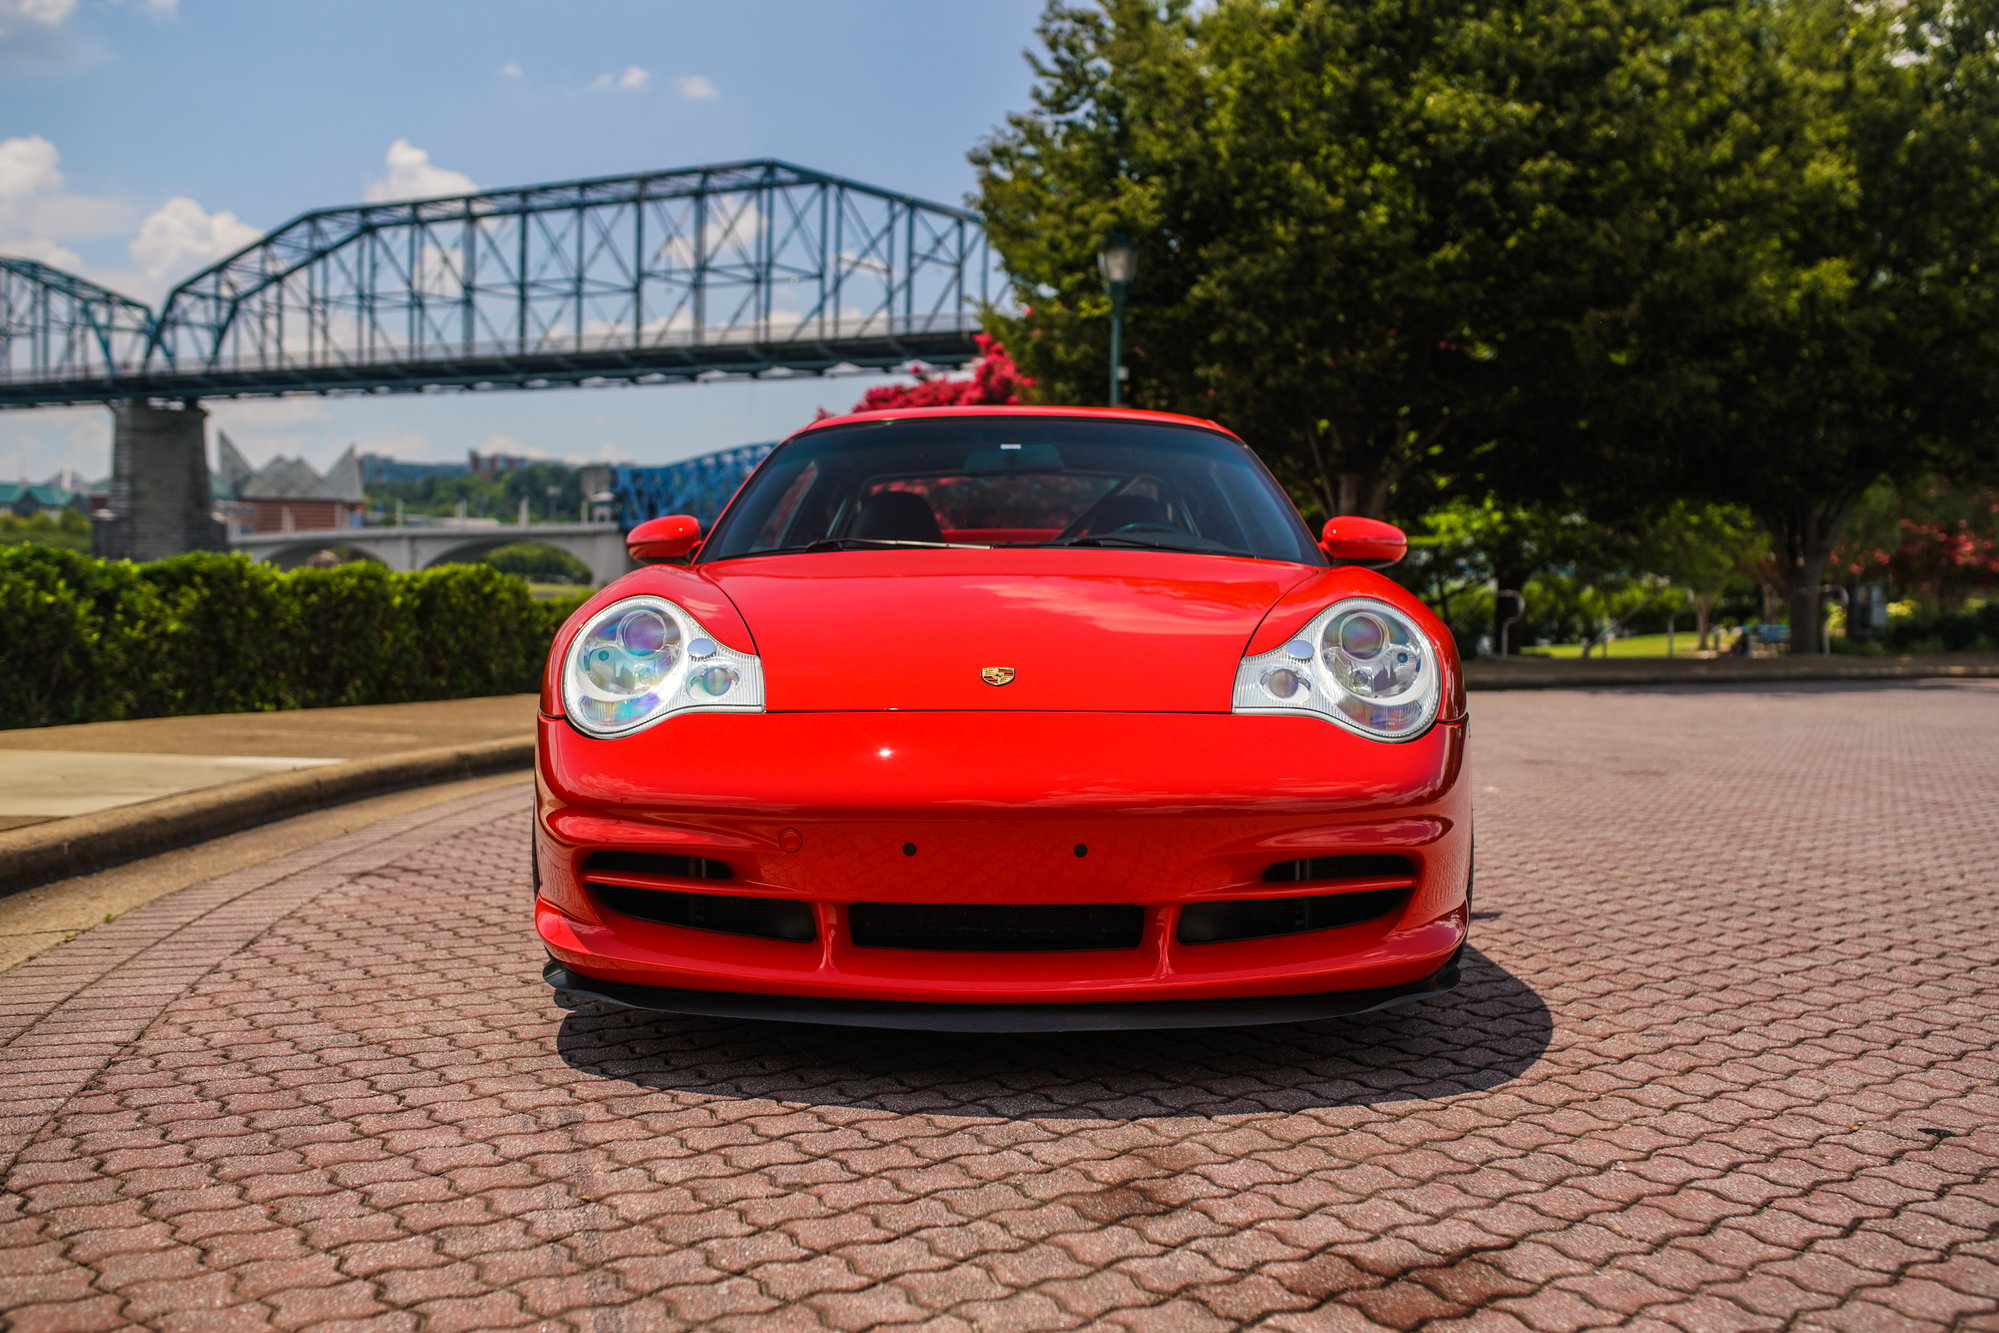 2004 Porsche GT3 - 2004 Porsche 911 GT3 - Used - VIN WP0AC299X4S692903 - 74,000 Miles - 6 cyl - Manual - Red - Chattanooga, TN 37363, United States